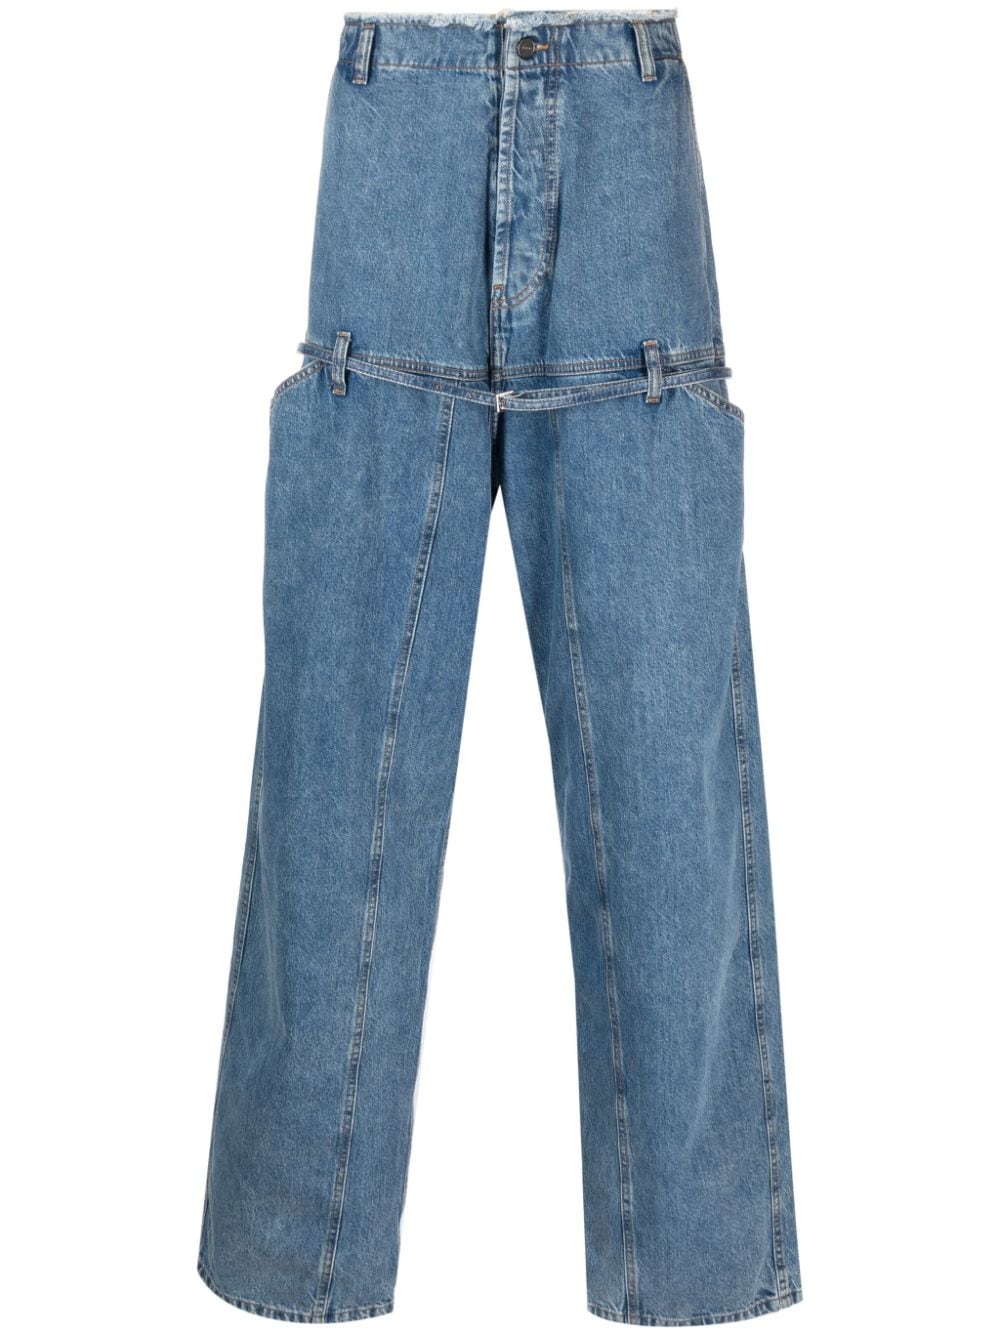 CLASSIC BELTED JEANS